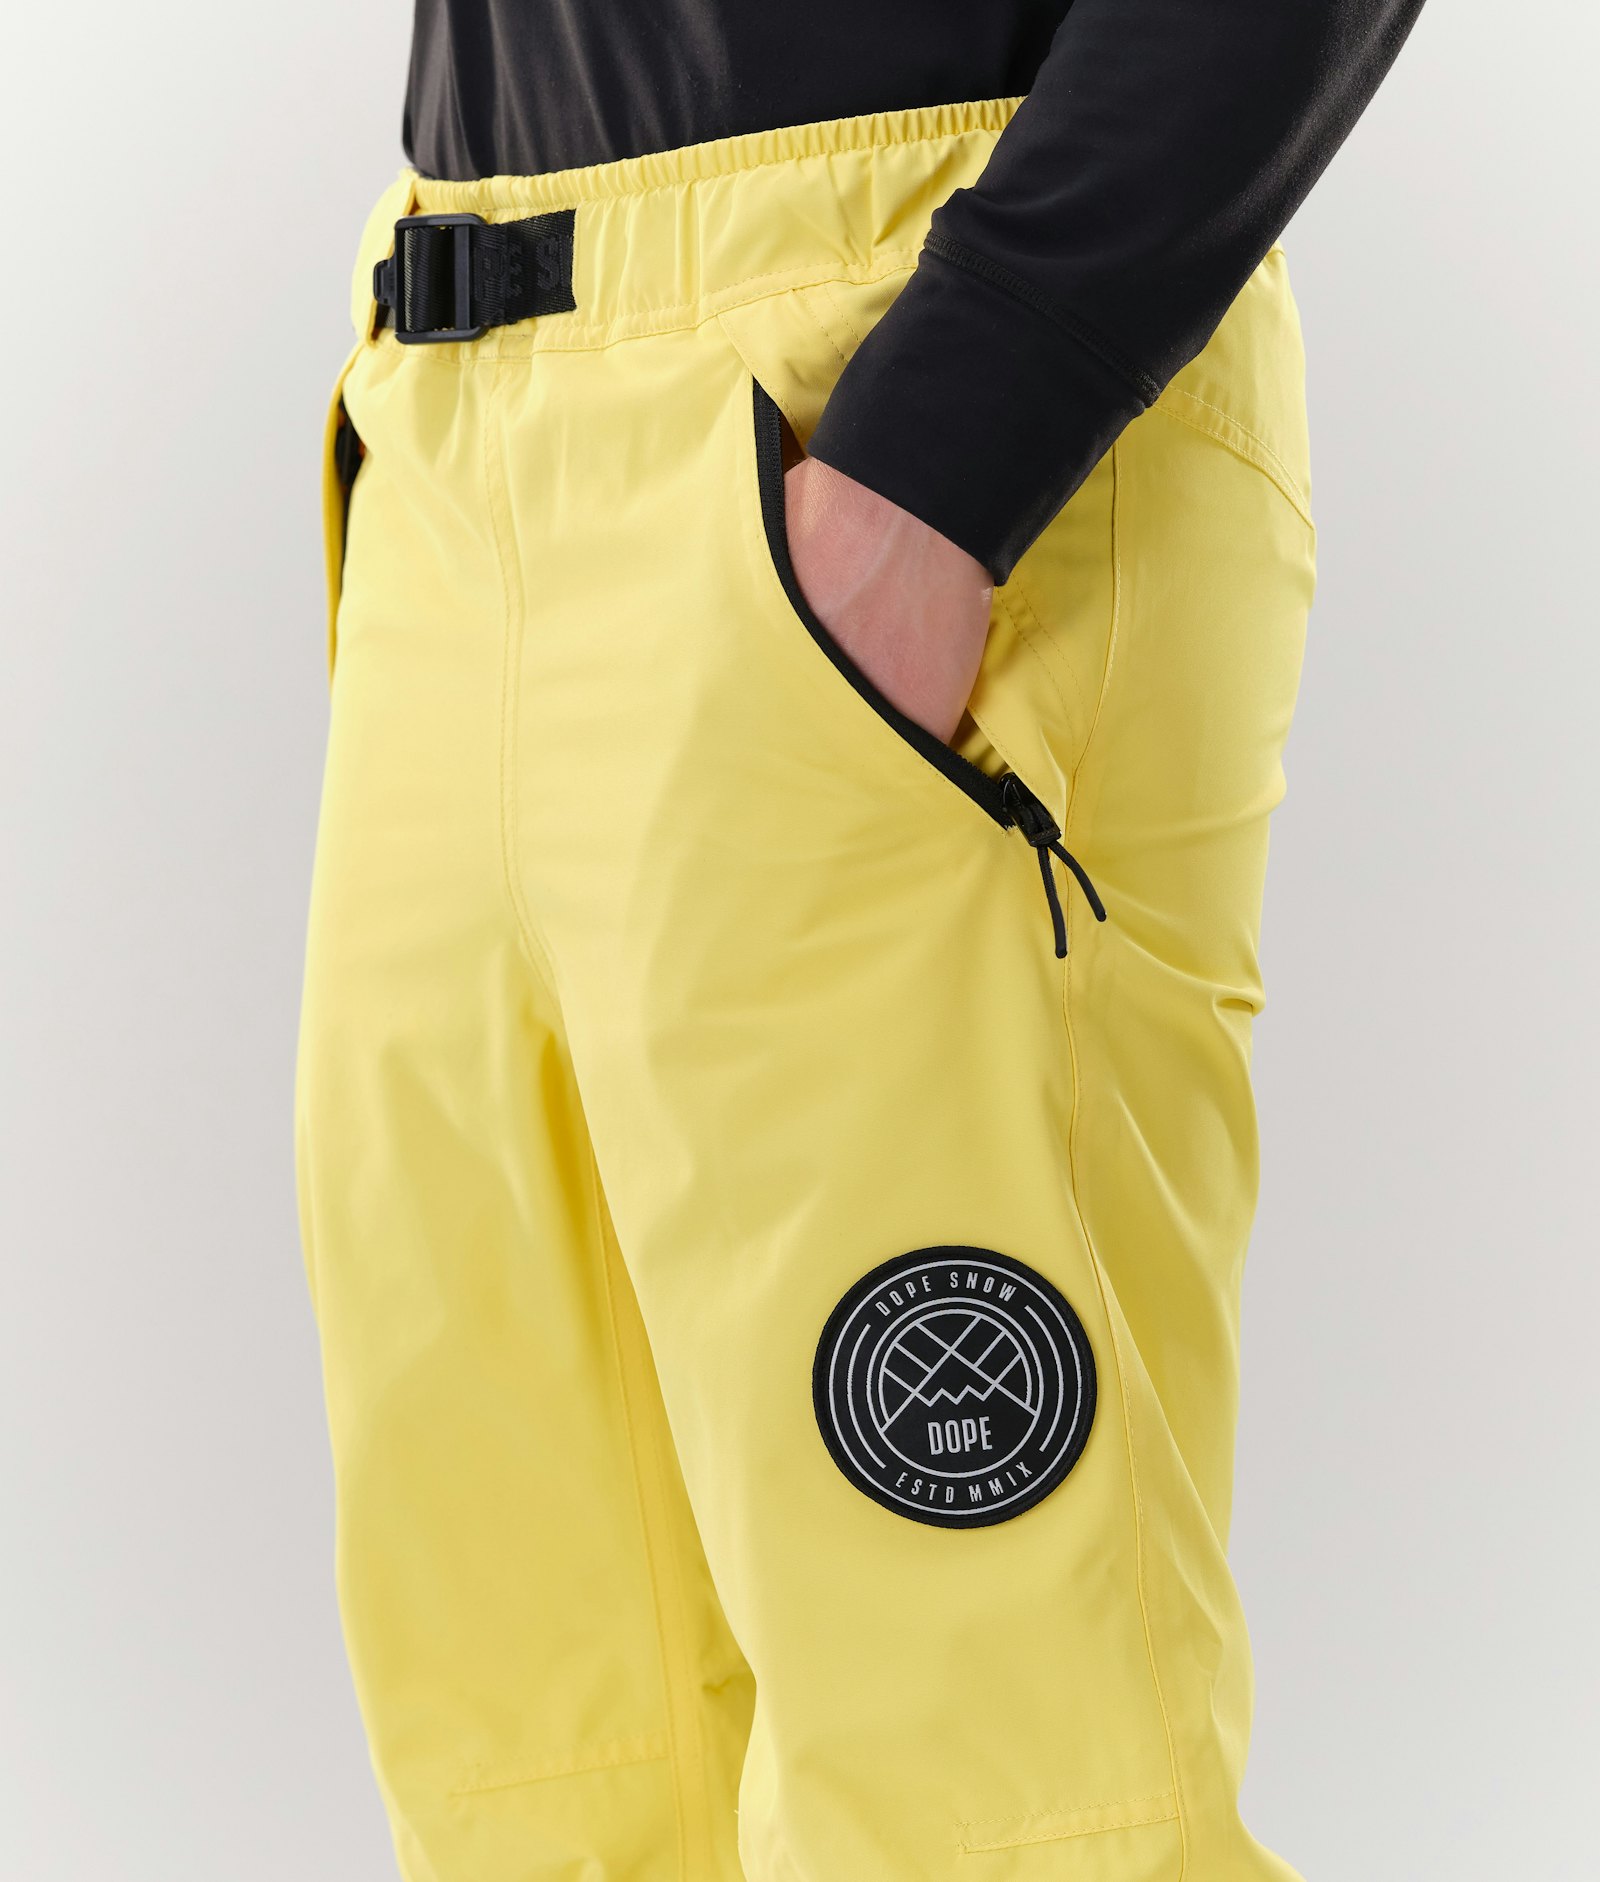 Dope Blizzard W 2020 Pantalones Esquí Mujer Faded Yellow